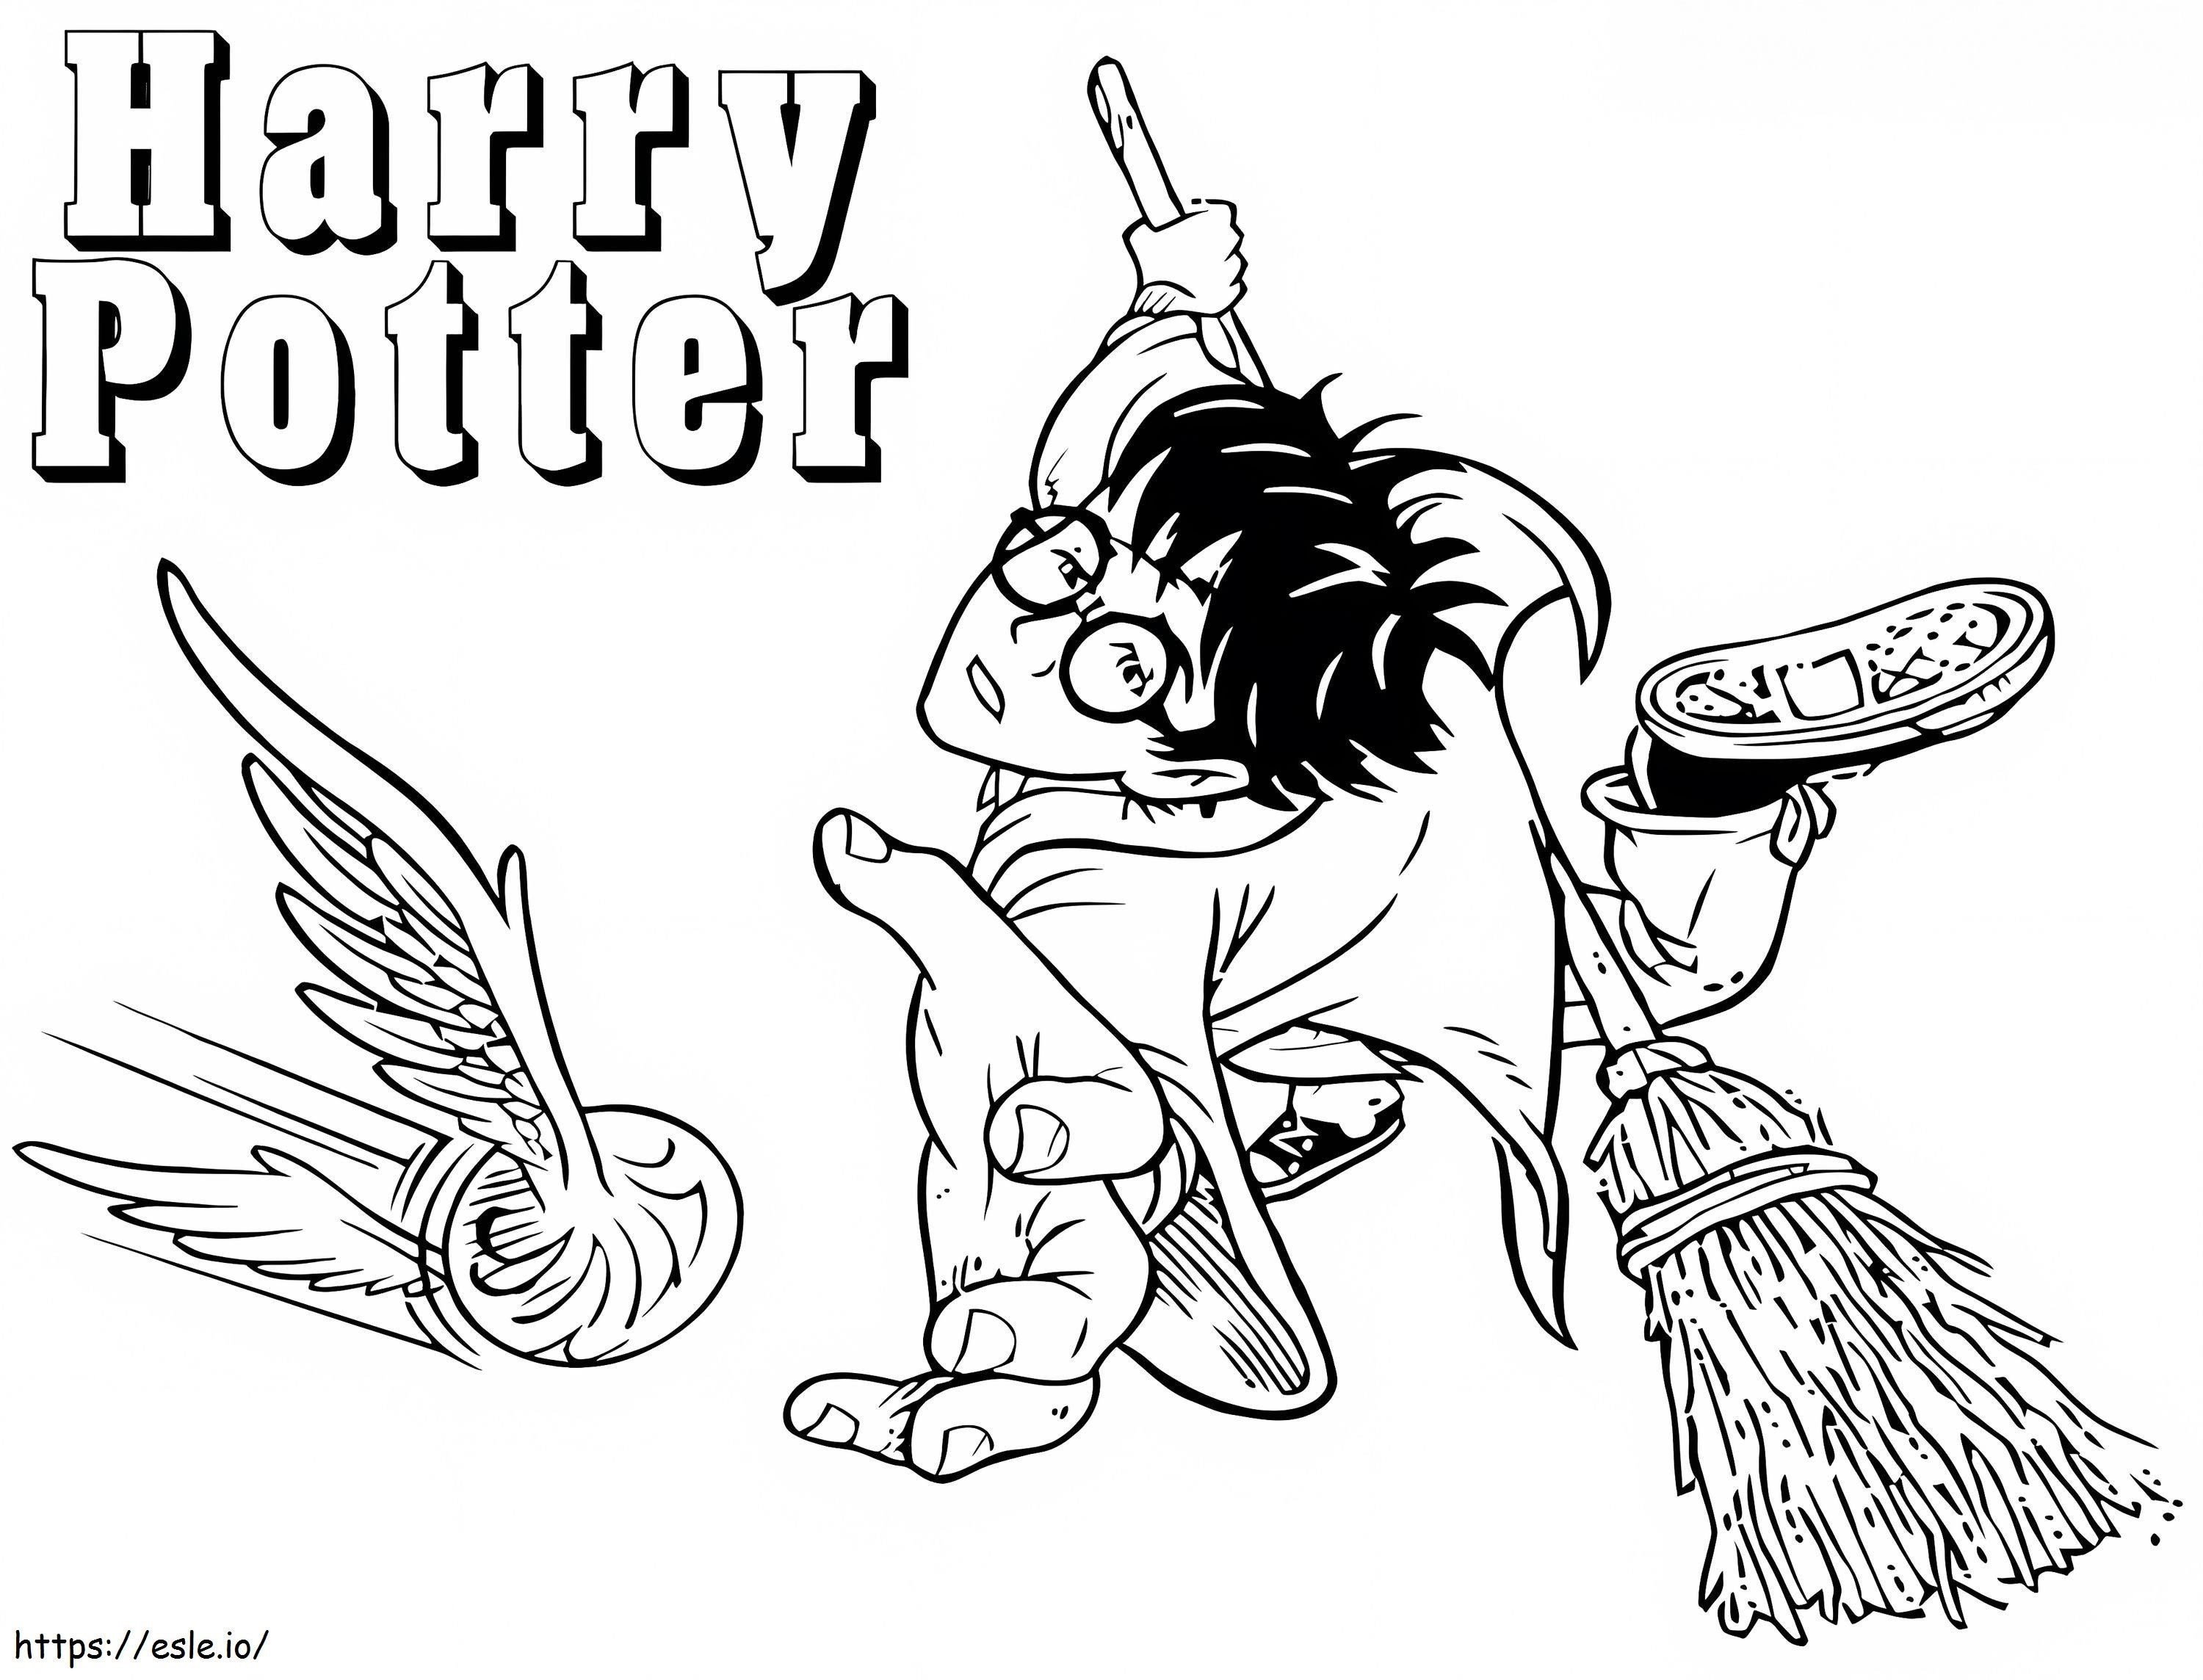 1583744655 Harry Potter To Print Out 31765 coloring page